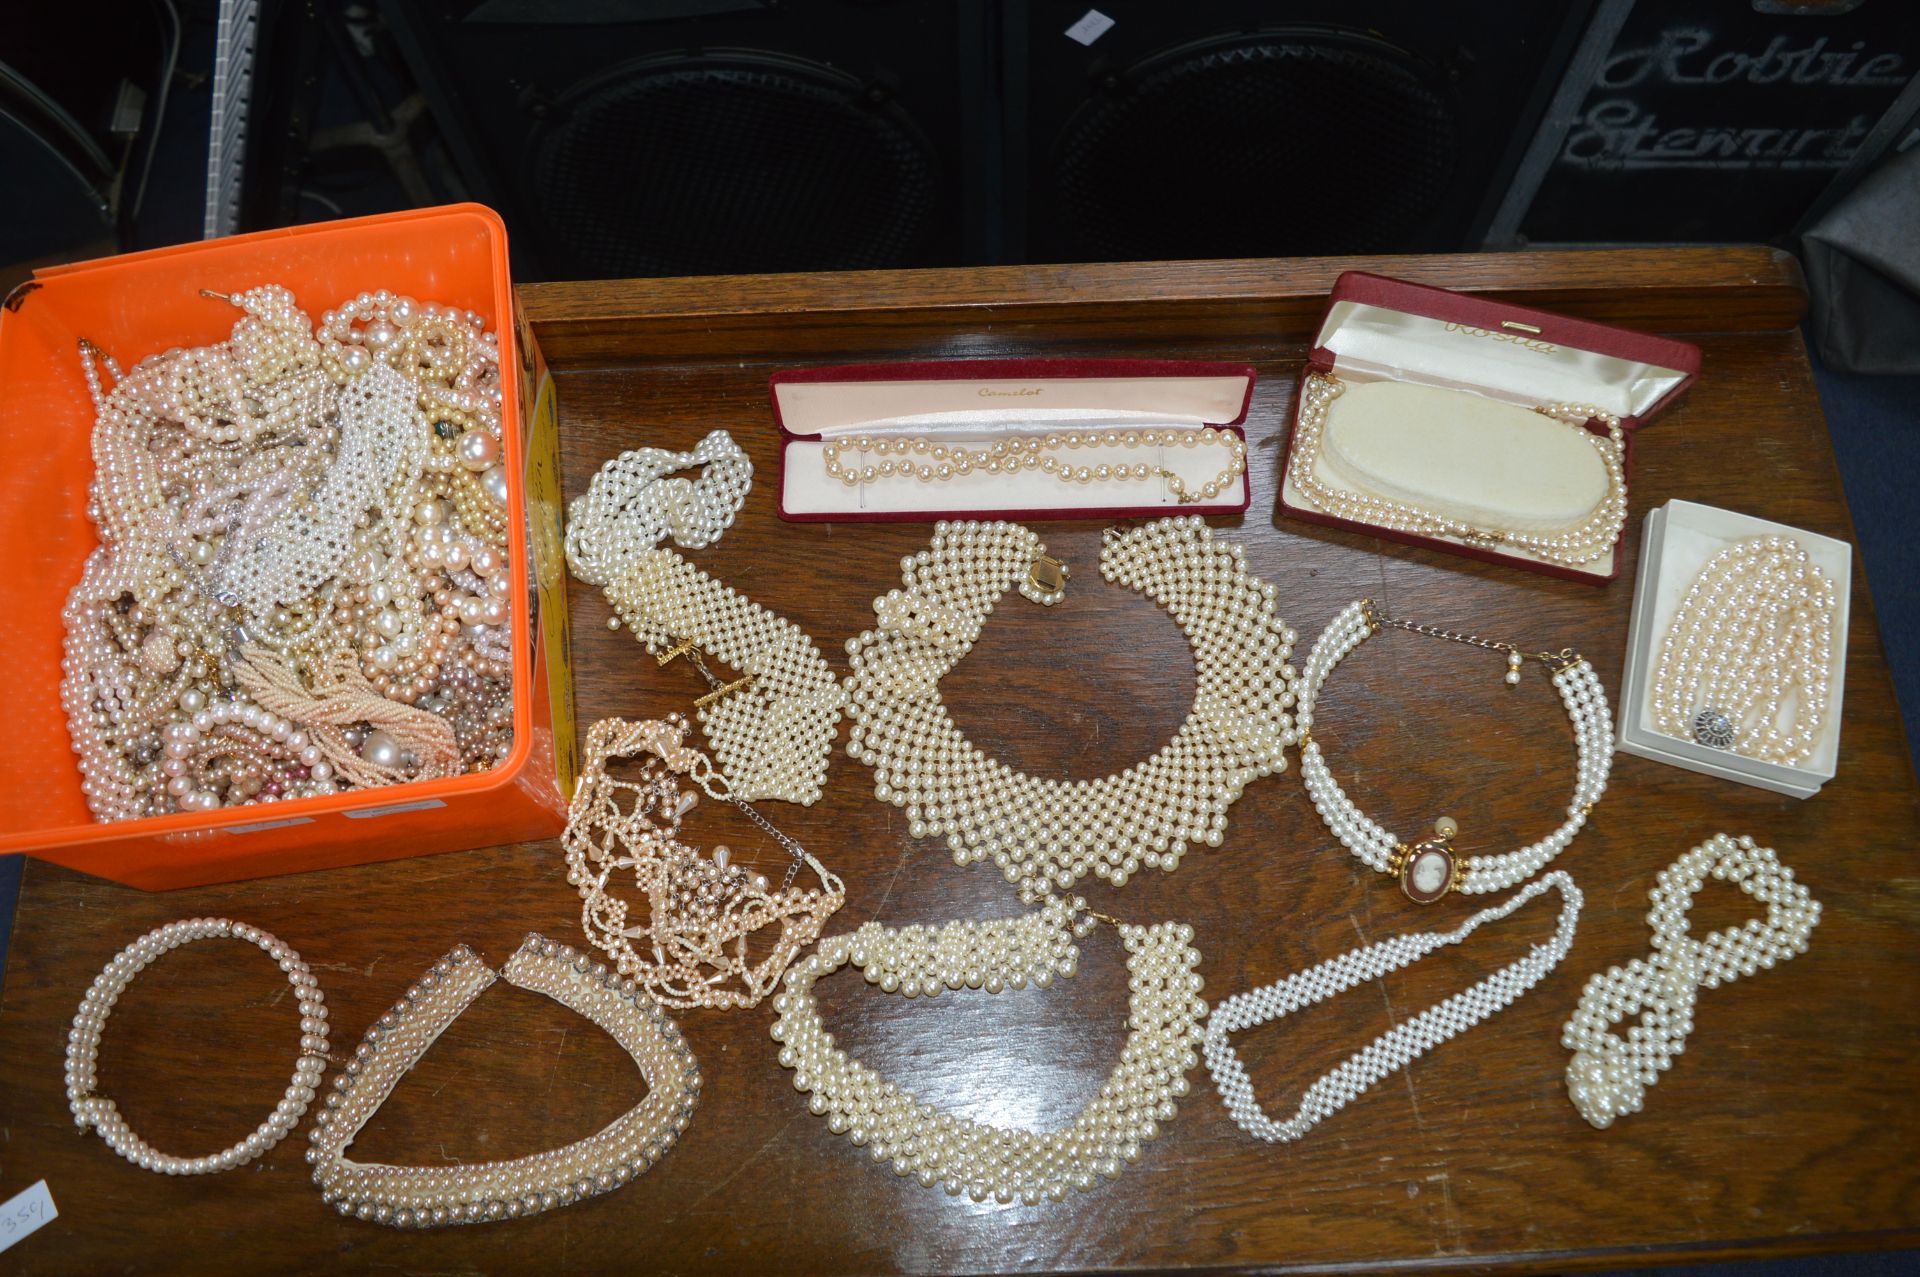 Tub of Pearl Necklaces, Chokers, etc.